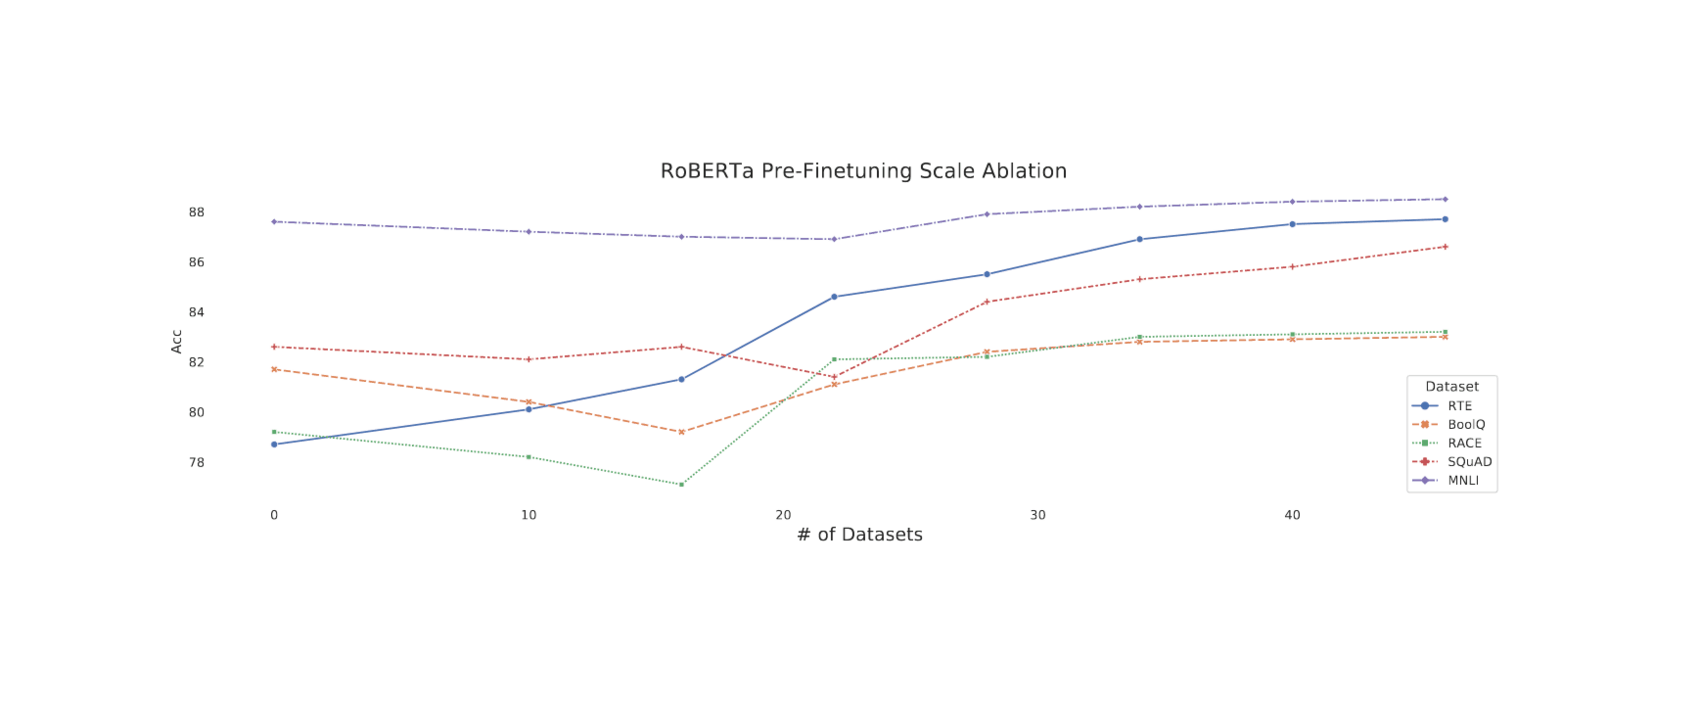 Figure 1: We plot the RoBERTa evaluation accuracy of five datasets: RTE, BoolQ, RACE, SQuAD, and MNLI, across various scales of multi-task learning measured in the number of datasets. We notice that performance initially degrades until a critical point is reached regarding the number of the datasets used by the MTL framework for all but one dataset. Past this critical point, our representations improve over the original RoBERTa model.